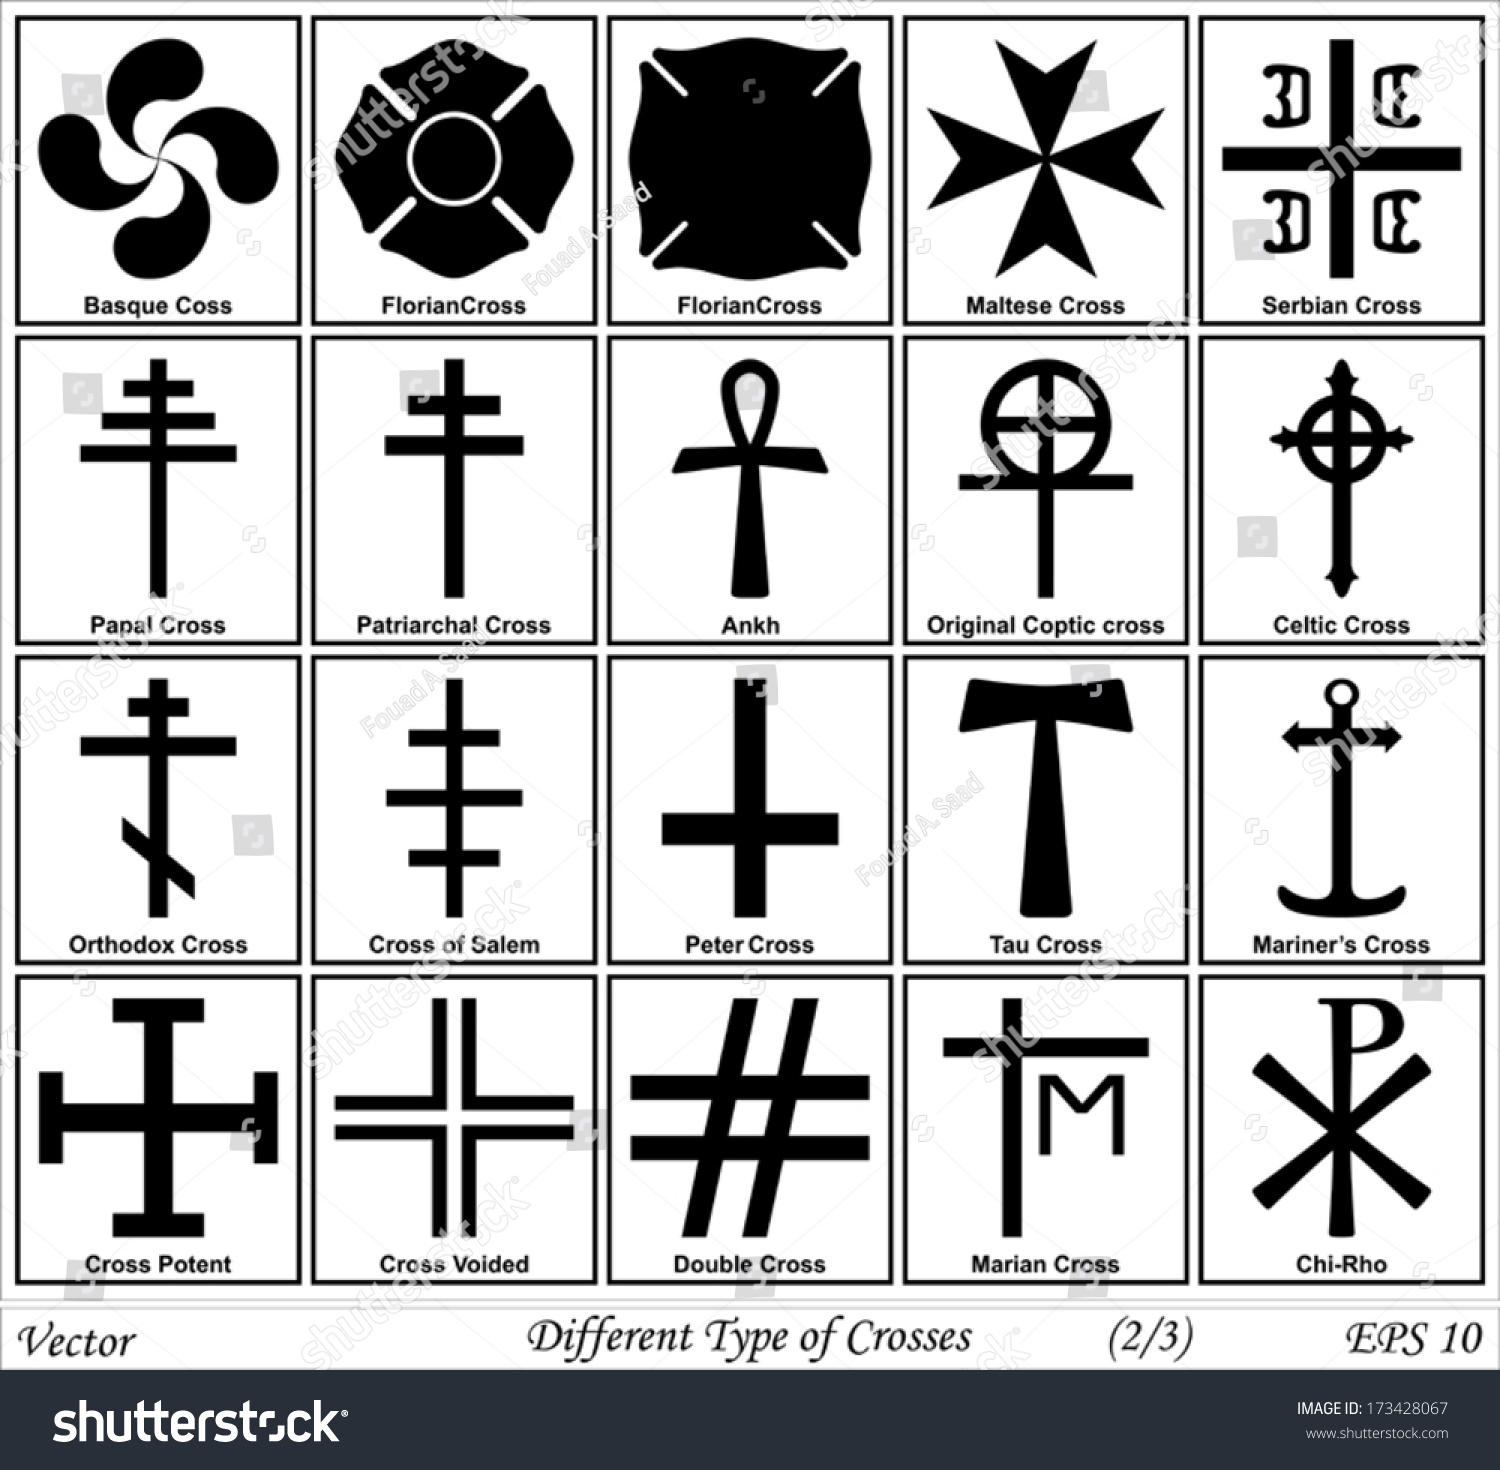 Different Types of Crosses and Their Meanings #173428067